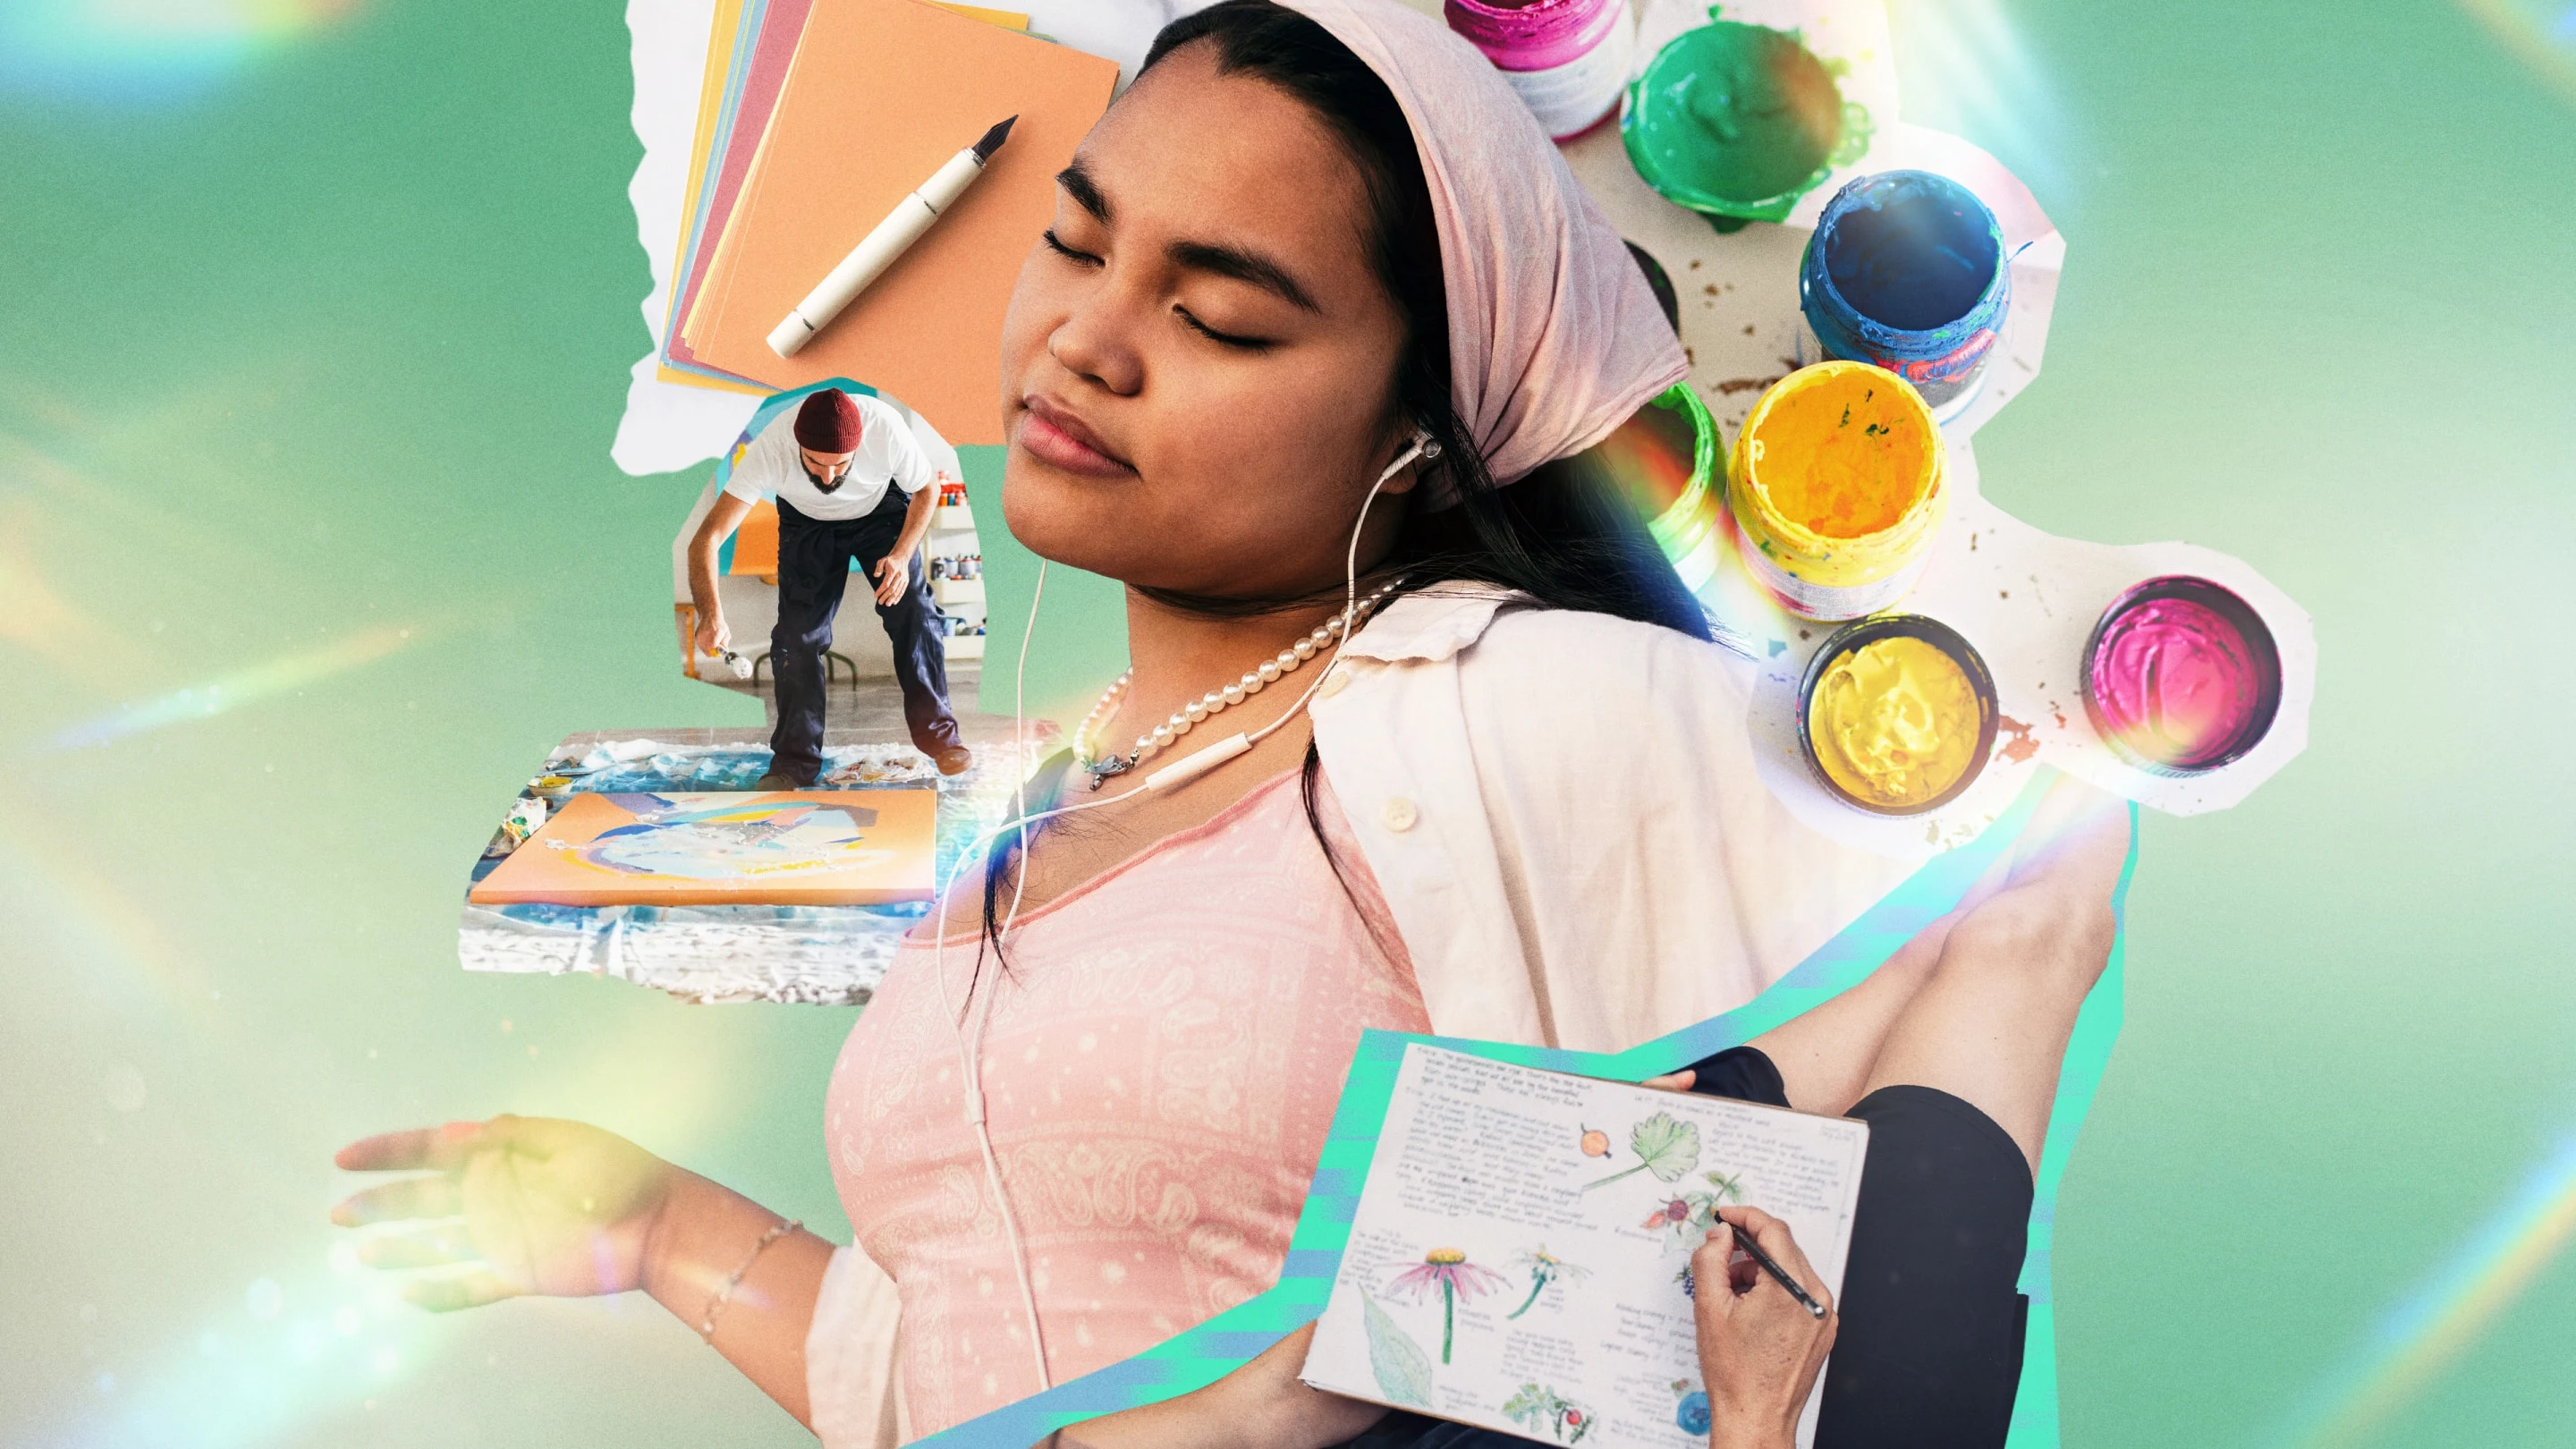 Collage featuring an Asian woman listening to music surrounded by watercolor paints, a woman journaling, a man spray painting a canvas and a stack of paper with pen.